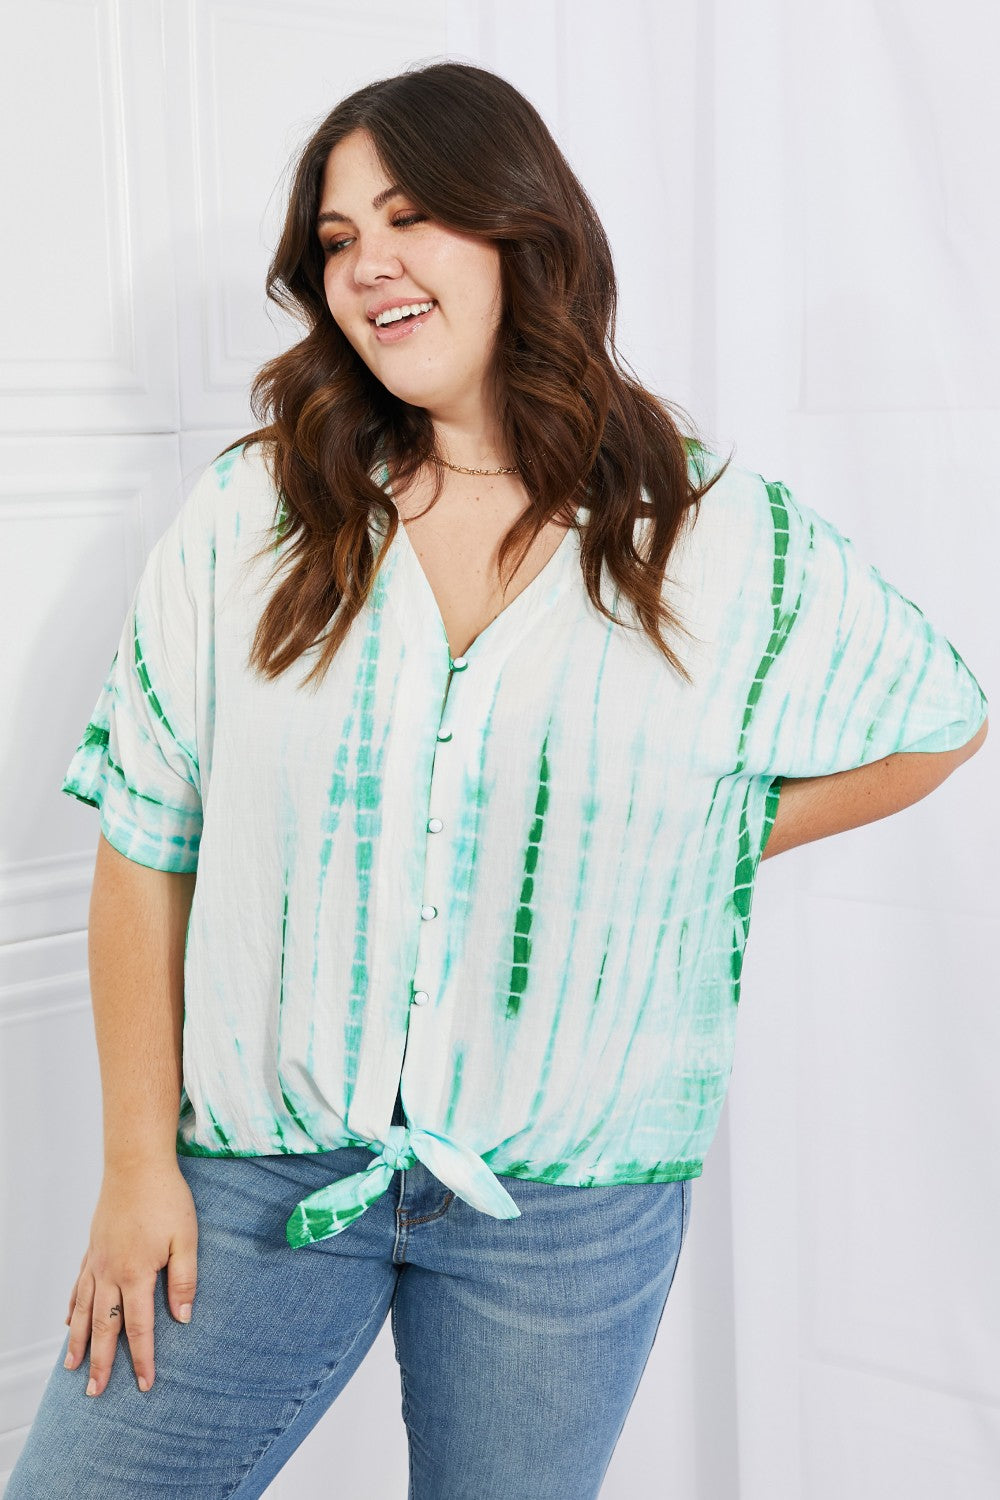 Beachy Keen Full Size Tie-Dye Top - Women’s Clothing & Accessories - Shirts & Tops - 7 - 2024